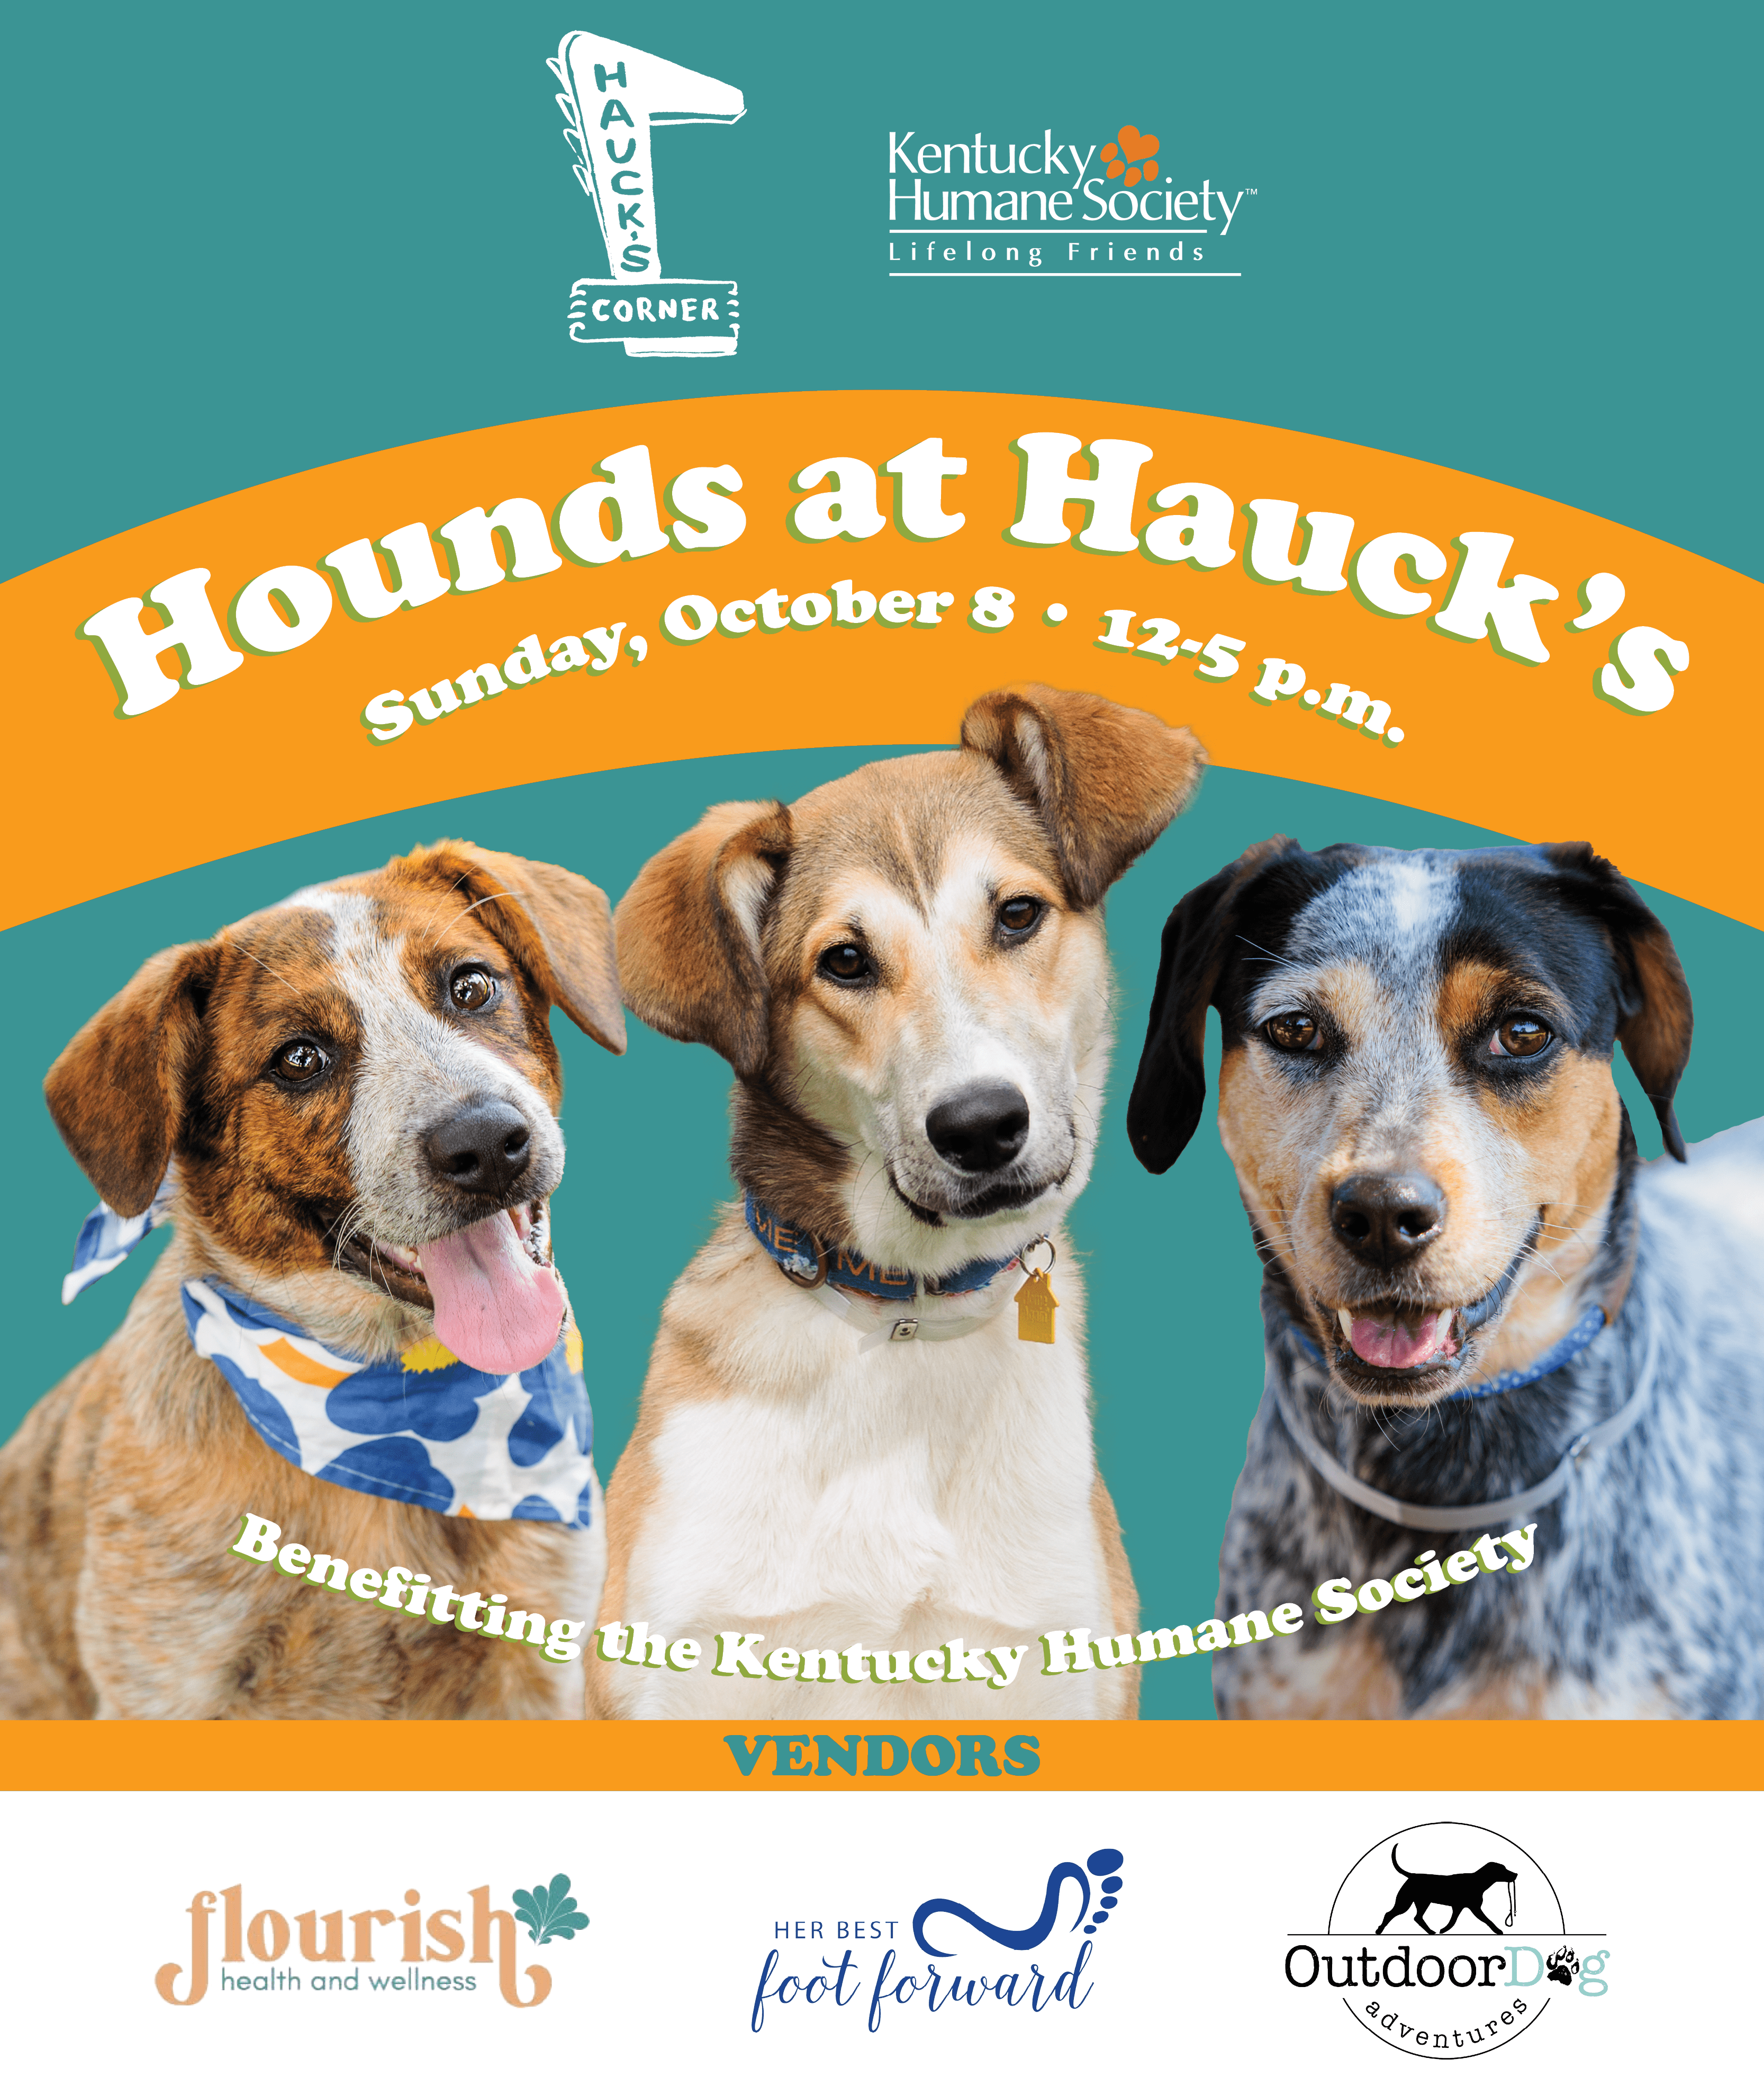 Hounds at Hauck's